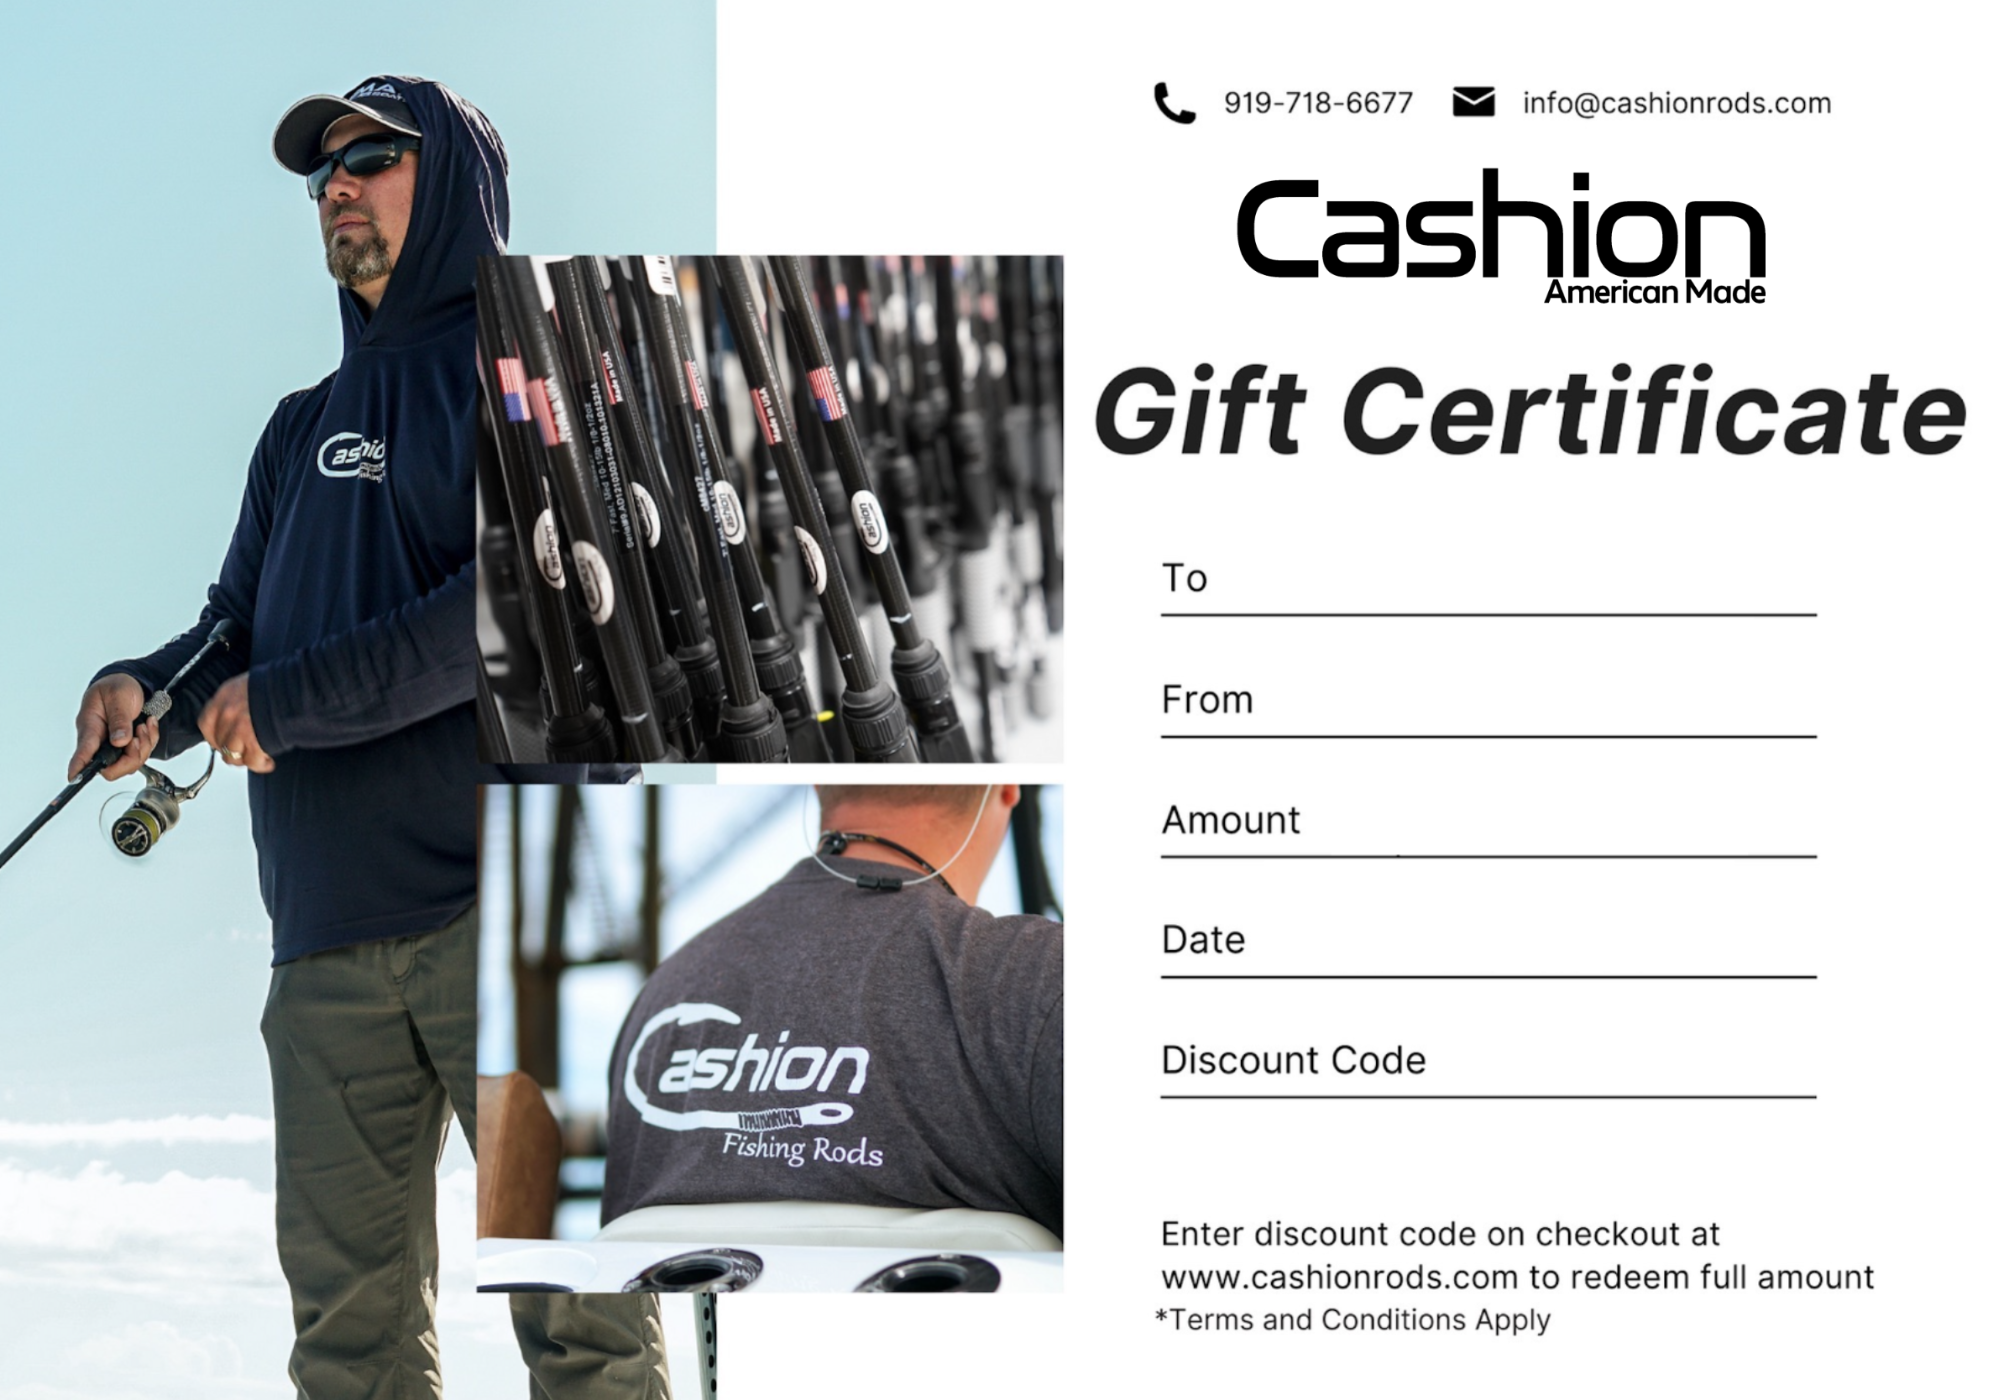 Cashion Rods Fishing Gift Certificates and Online Gift Cards for Fishermen  - Cashion Rods